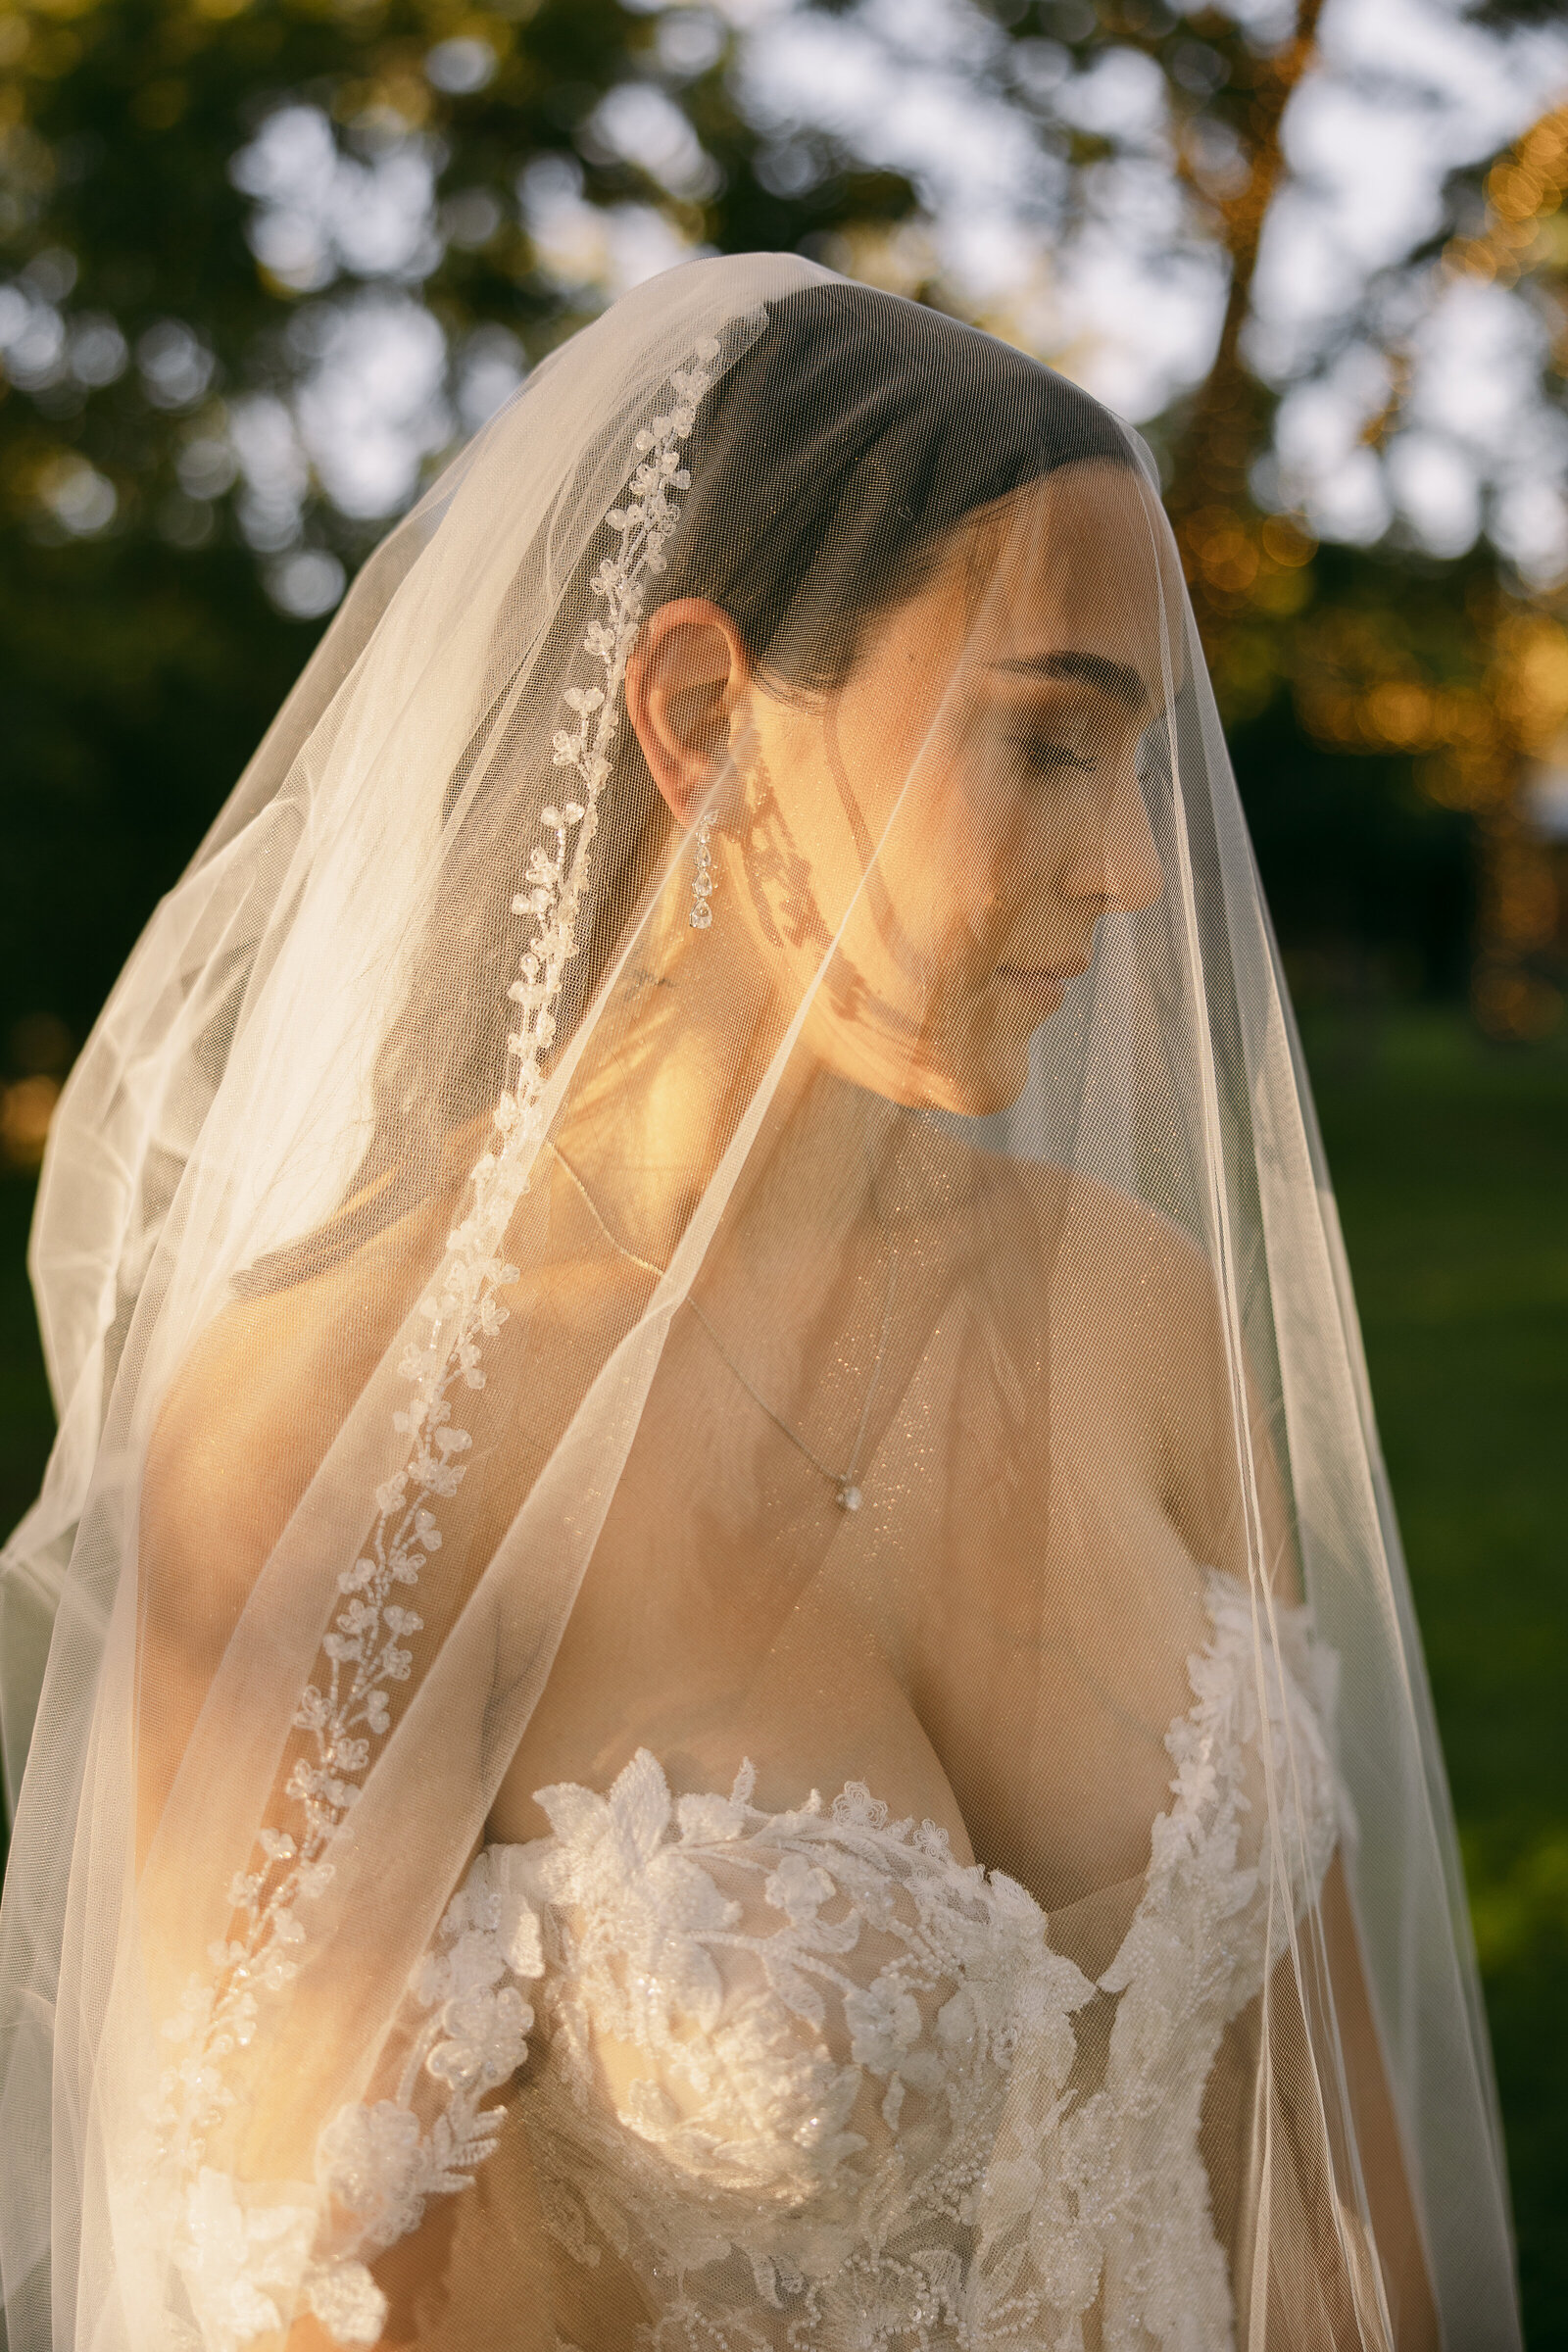 A bride looking off to the side with a veil over her head.